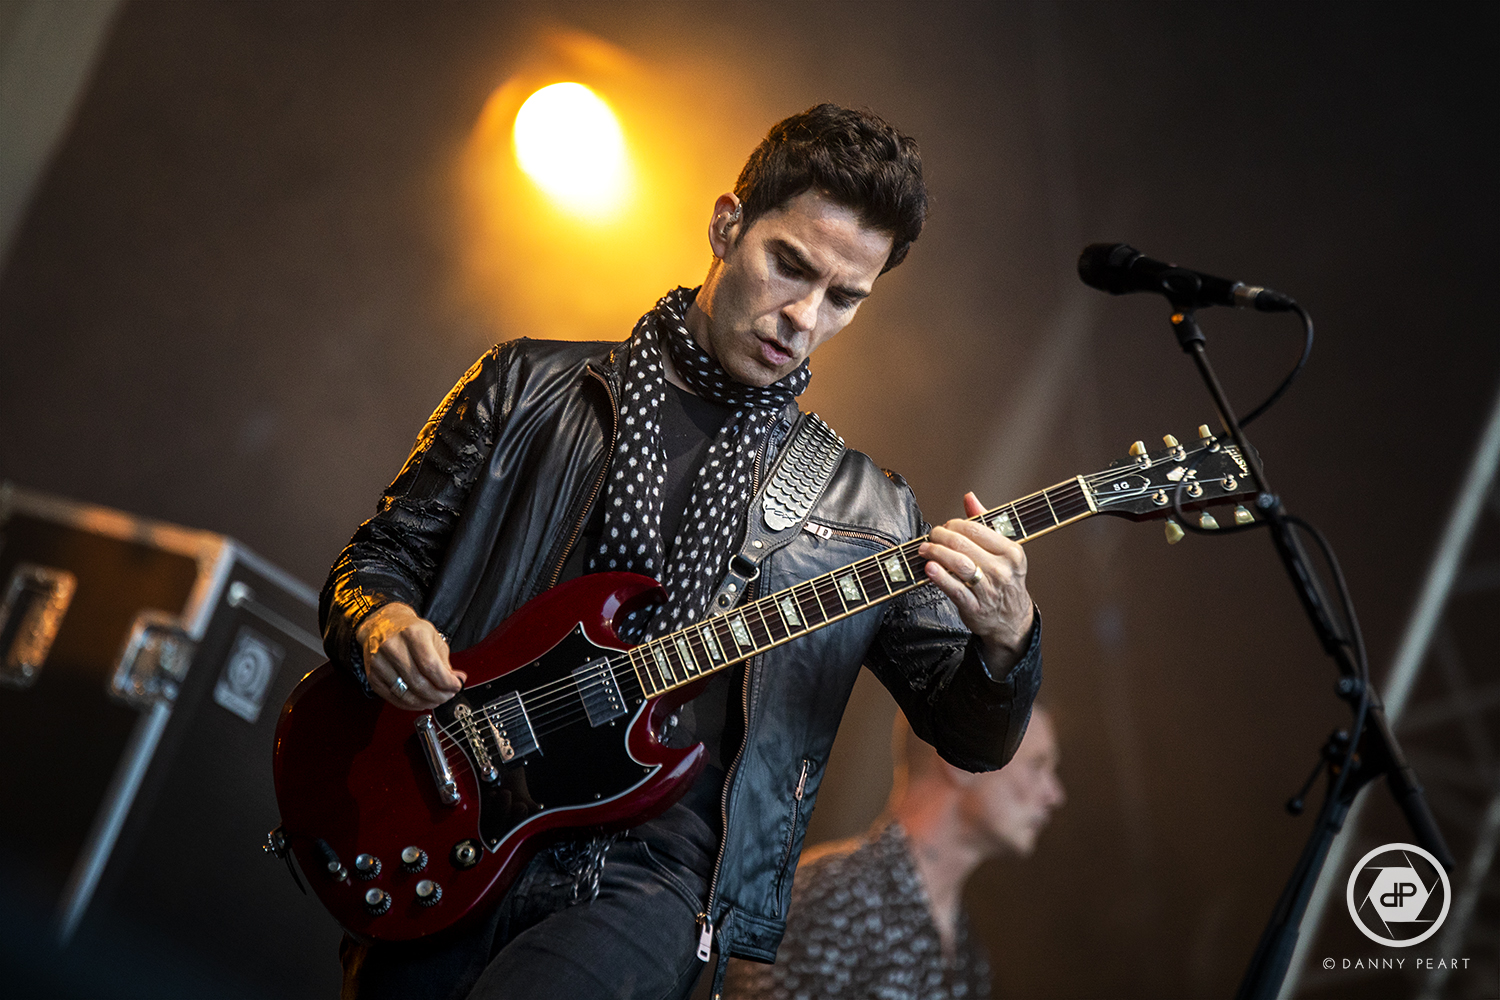 Stereophonics mark the return of live music in Scarborough